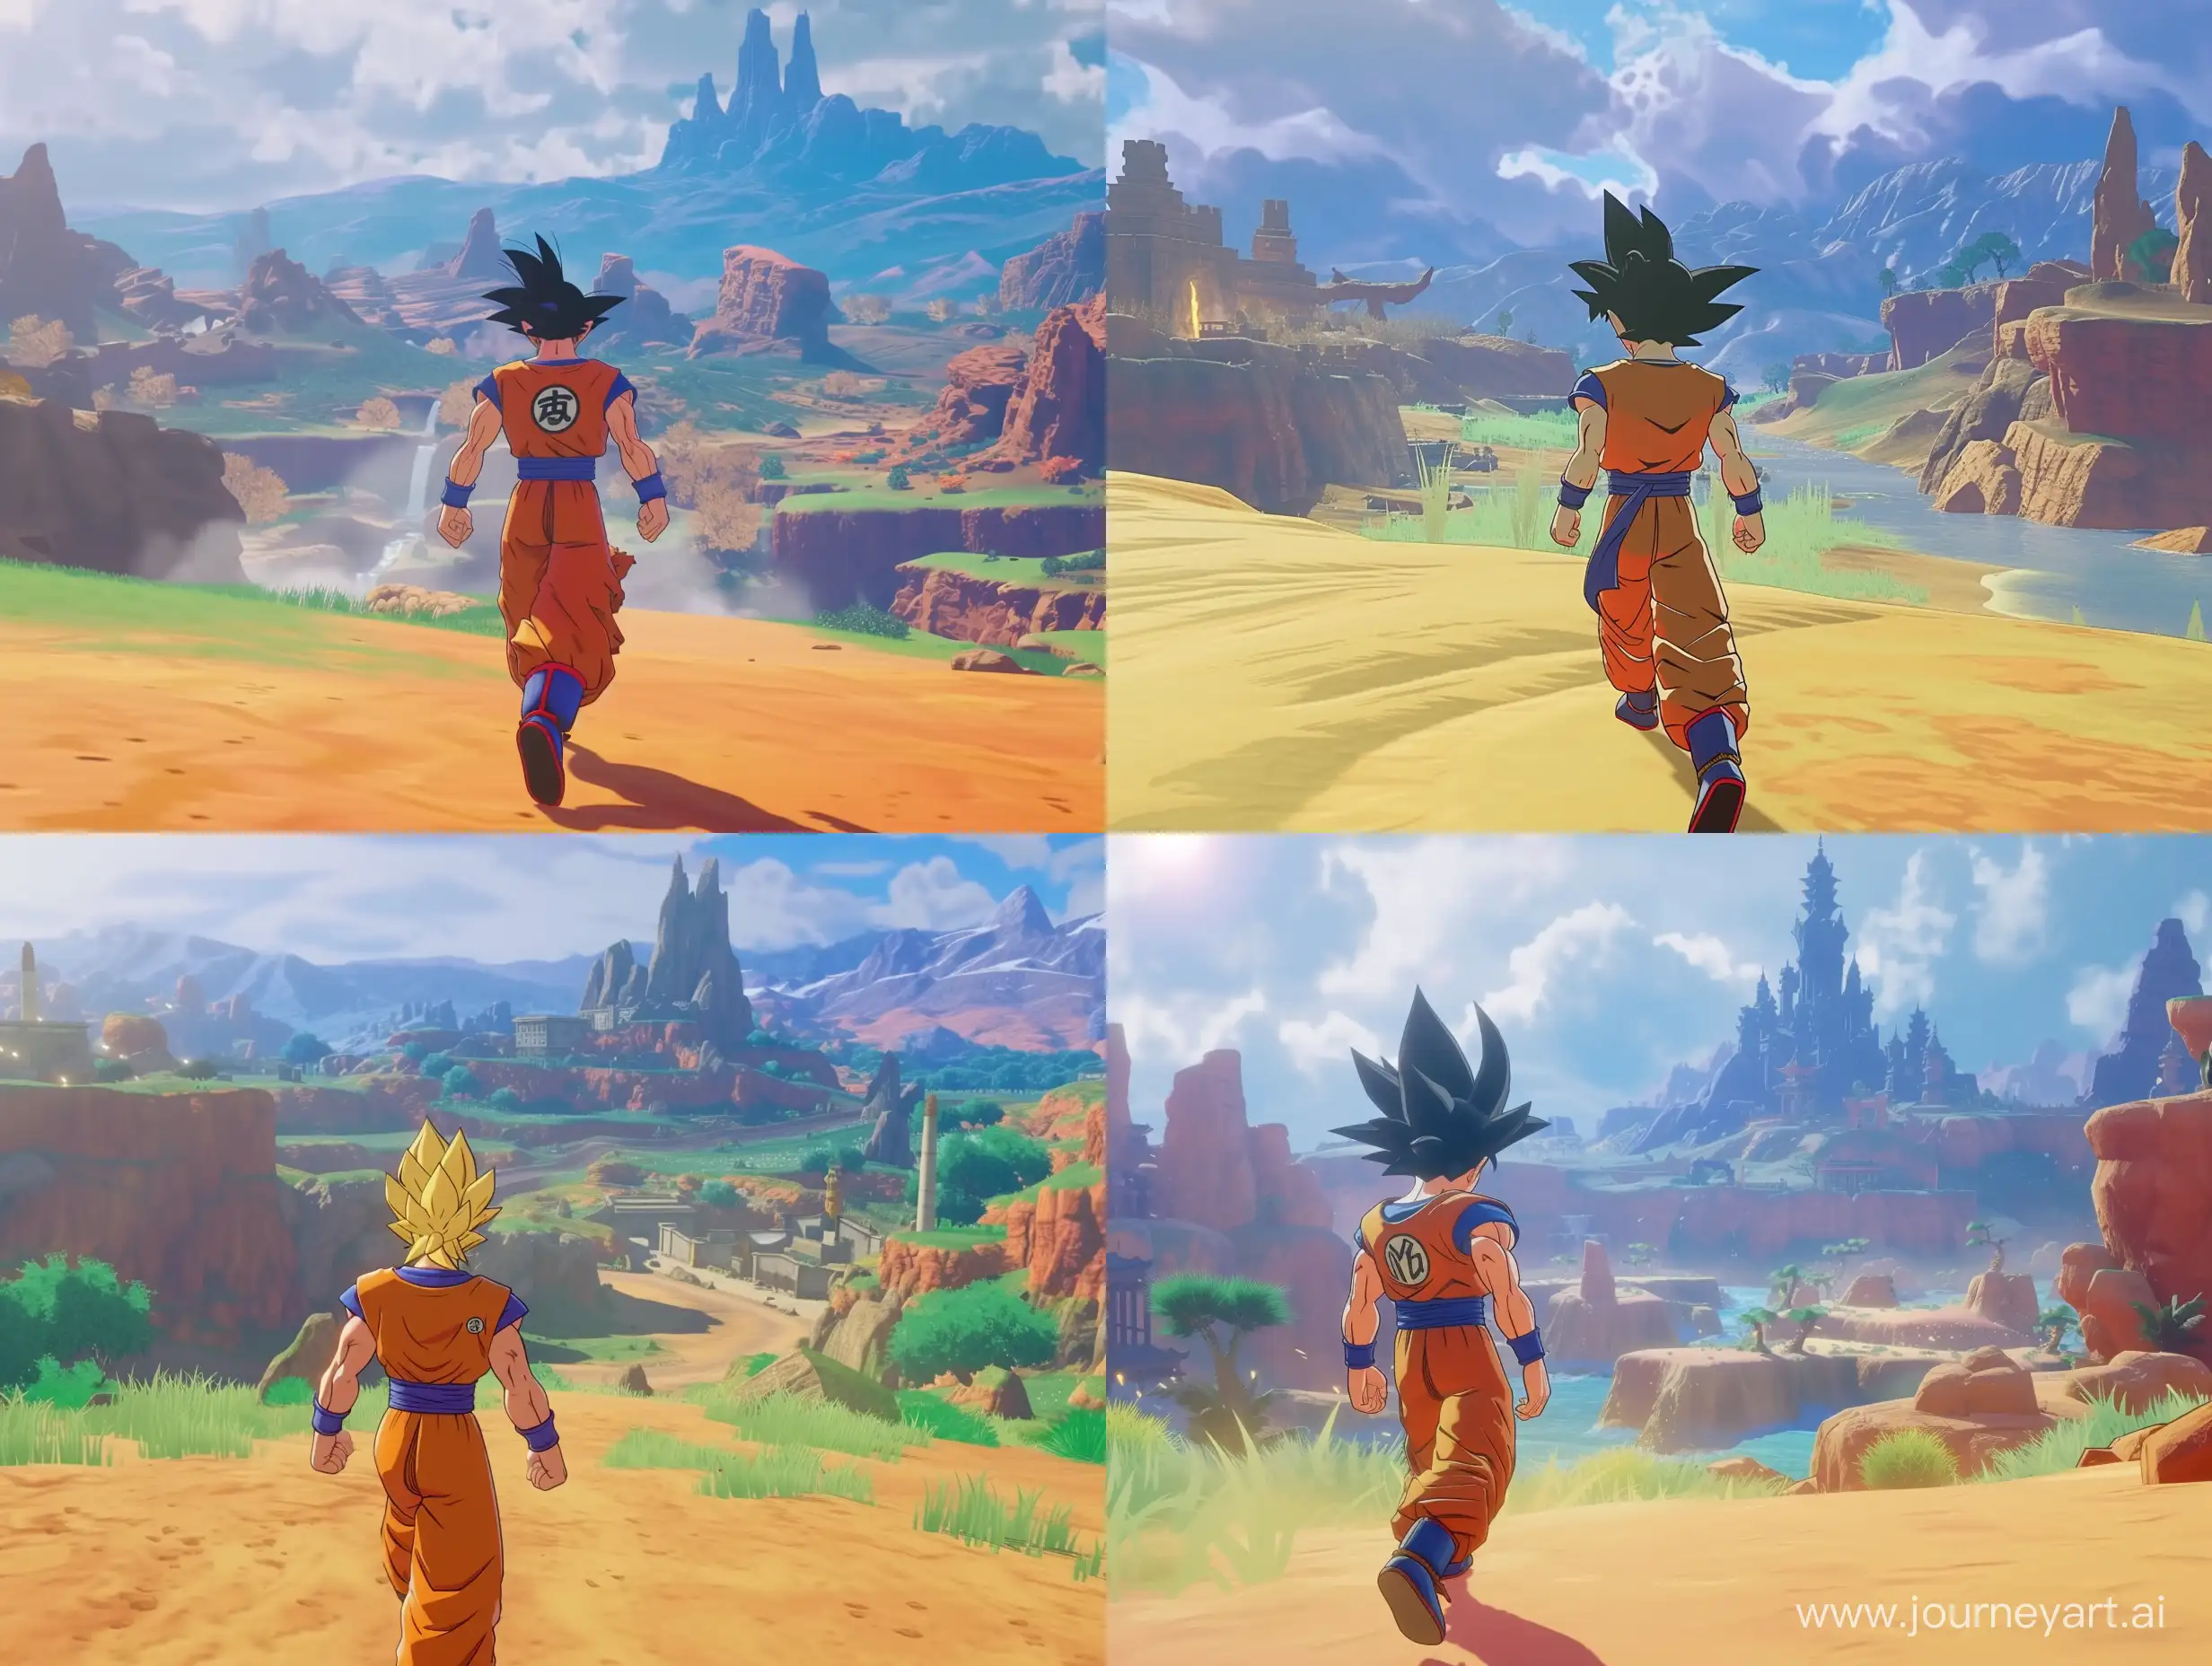 The video game " dragon ball z fighters" is set in a creative world  and a full view third-person perspective. Specifically designed for the PS5, this version follows the main character on an expansive open-world adventure powered by the Unreal Engine 5. The game is set in a daytime setting in an open environment landscape. The main character is seen walking through a open area
